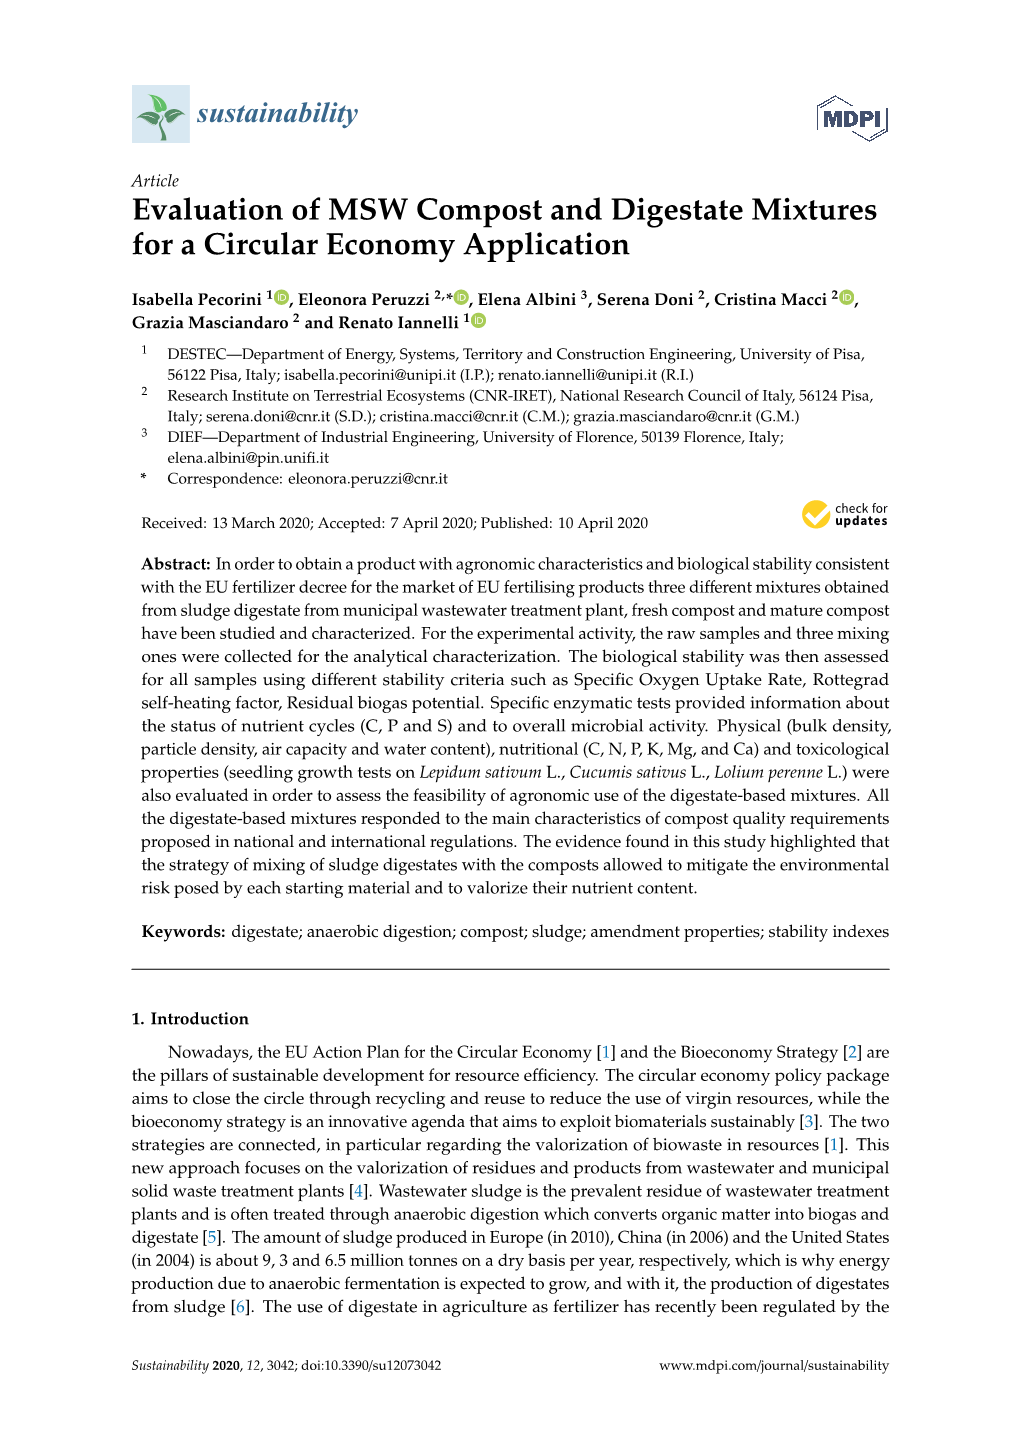 Evaluation of MSW Compost and Digestate Mixtures for a Circular Economy Application